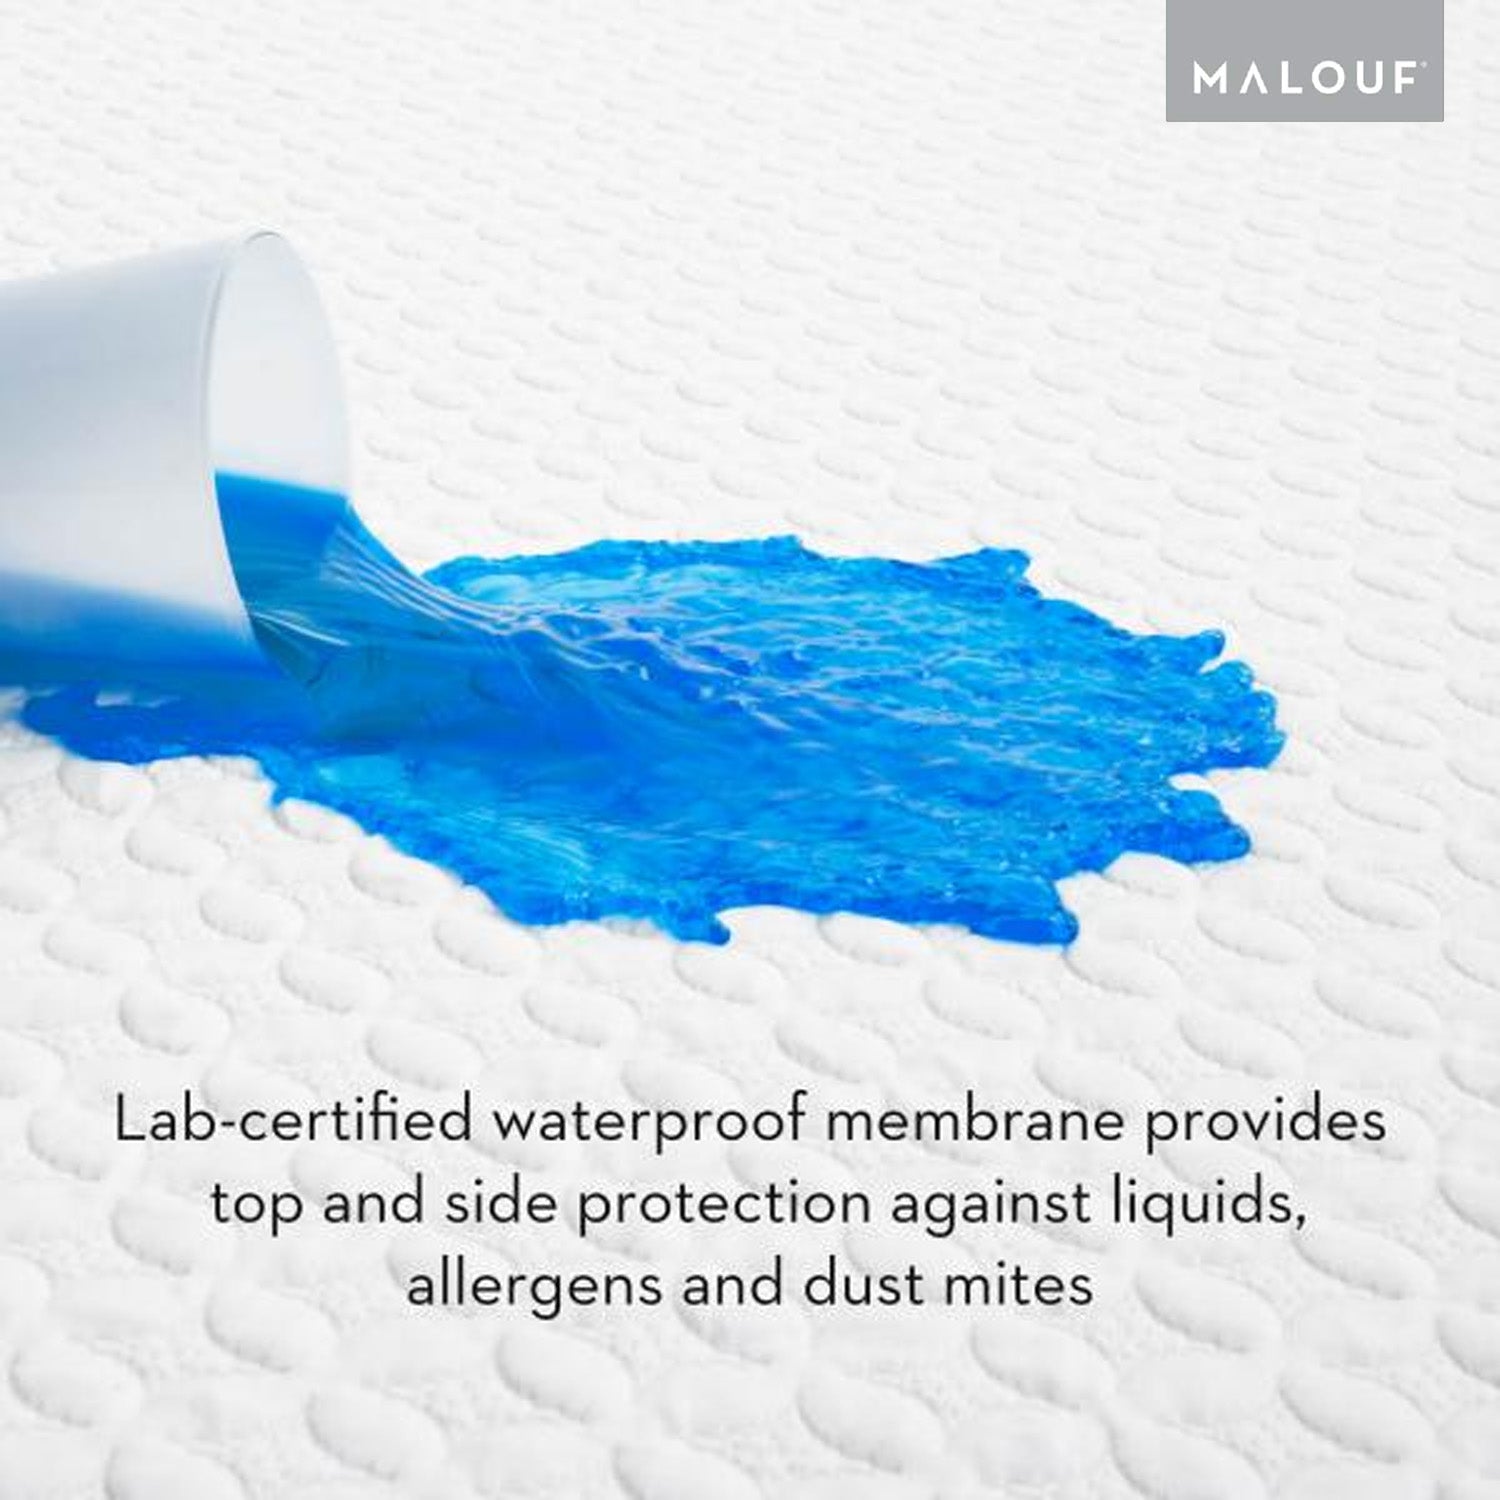 Malouf FIVE 5IDED® ICETECH™ MATTRESS PROTECTOR